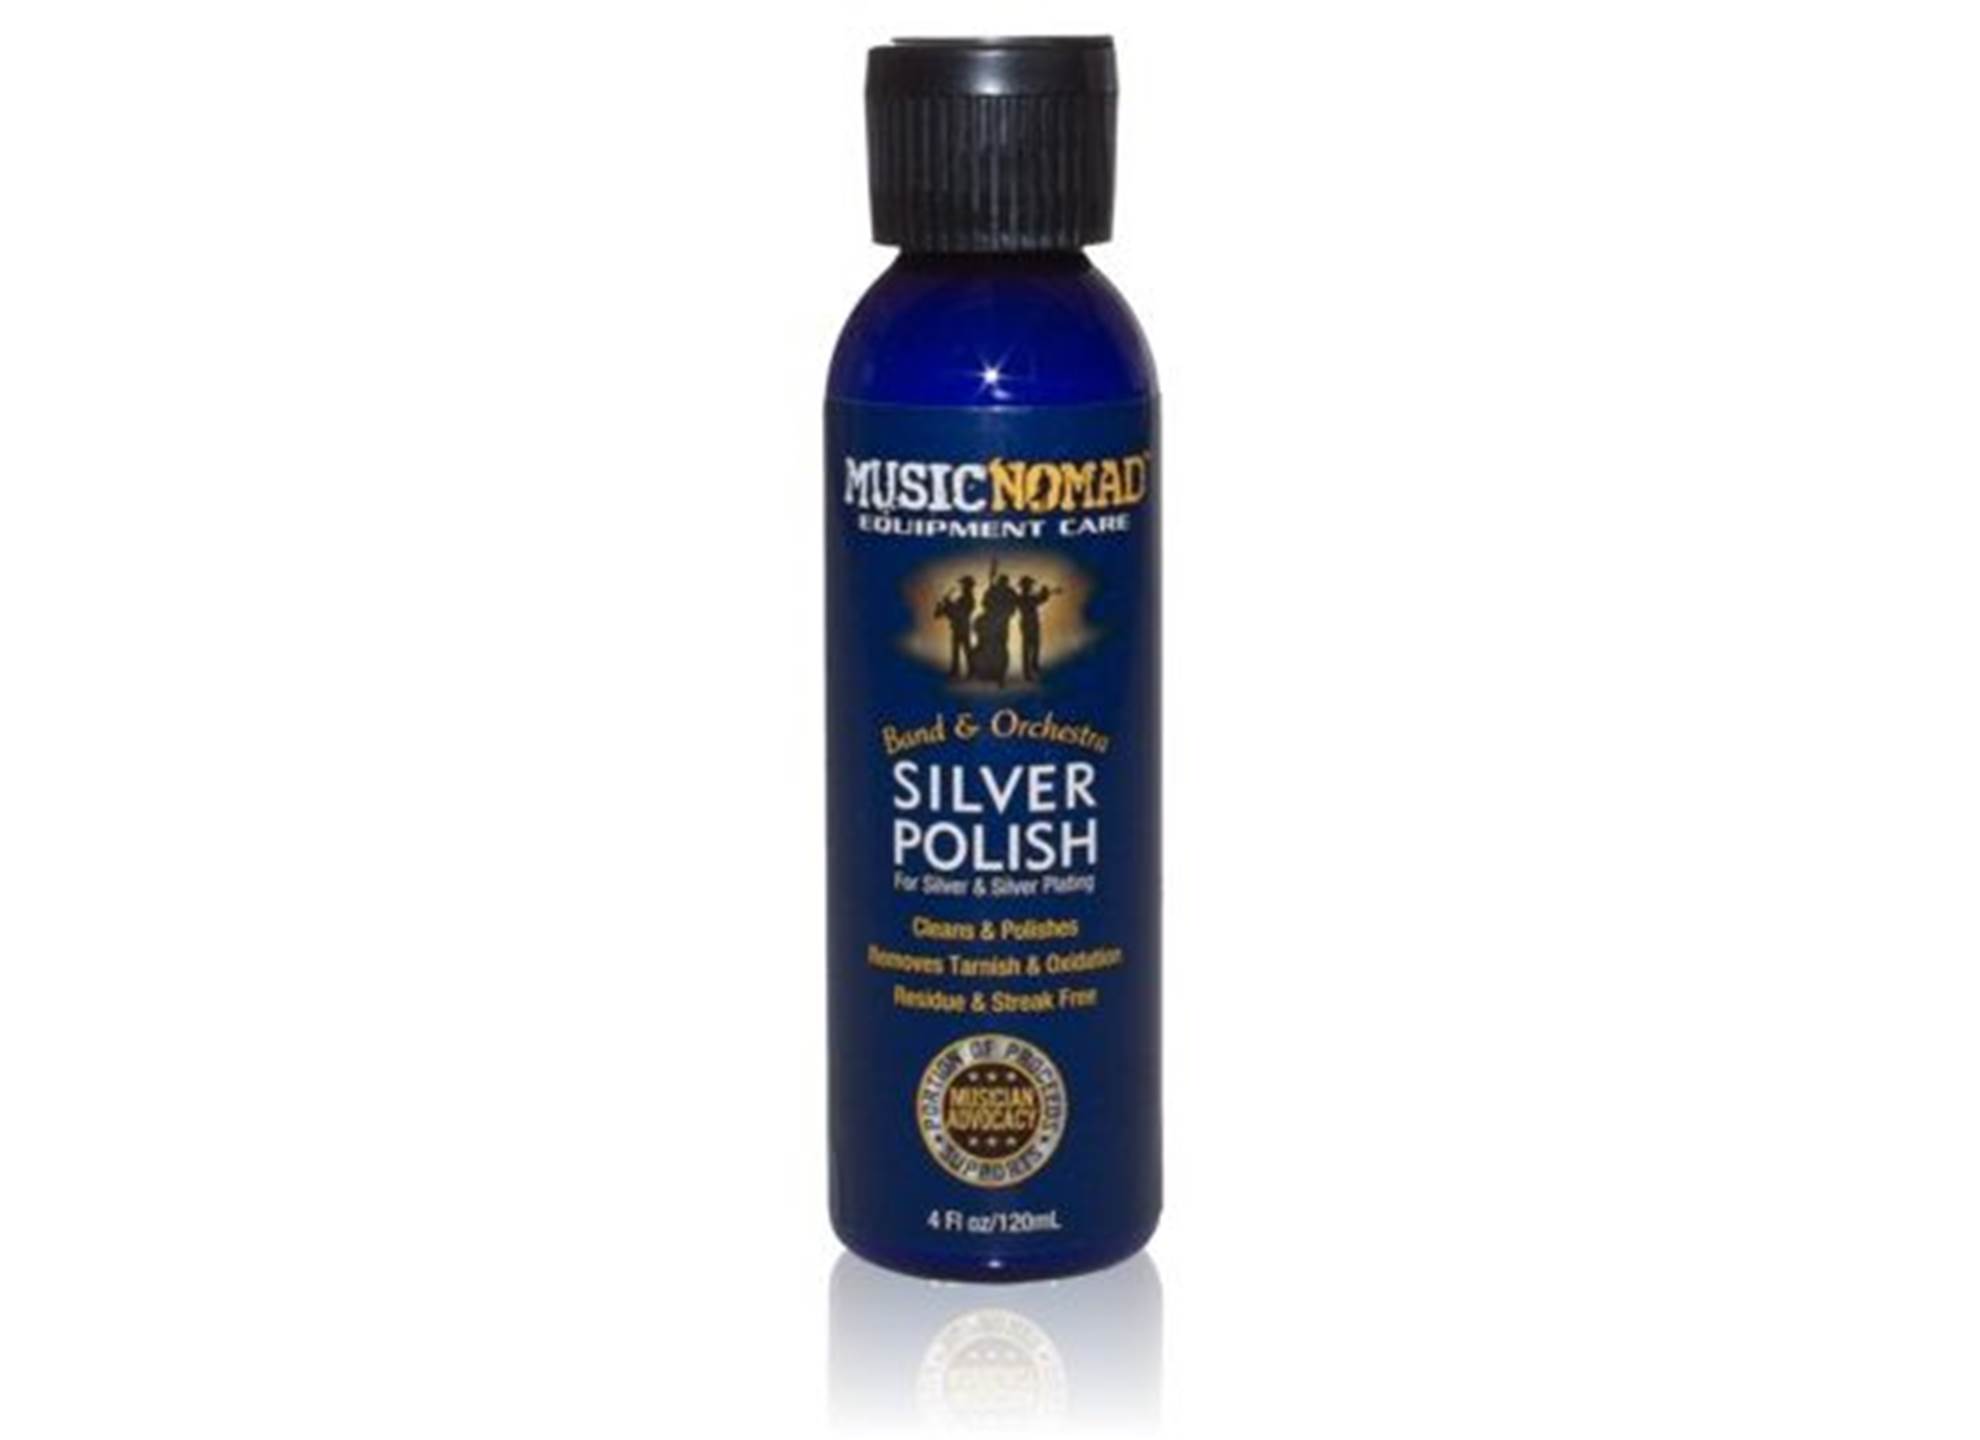 Silver Polish for Silver and Silver Plating